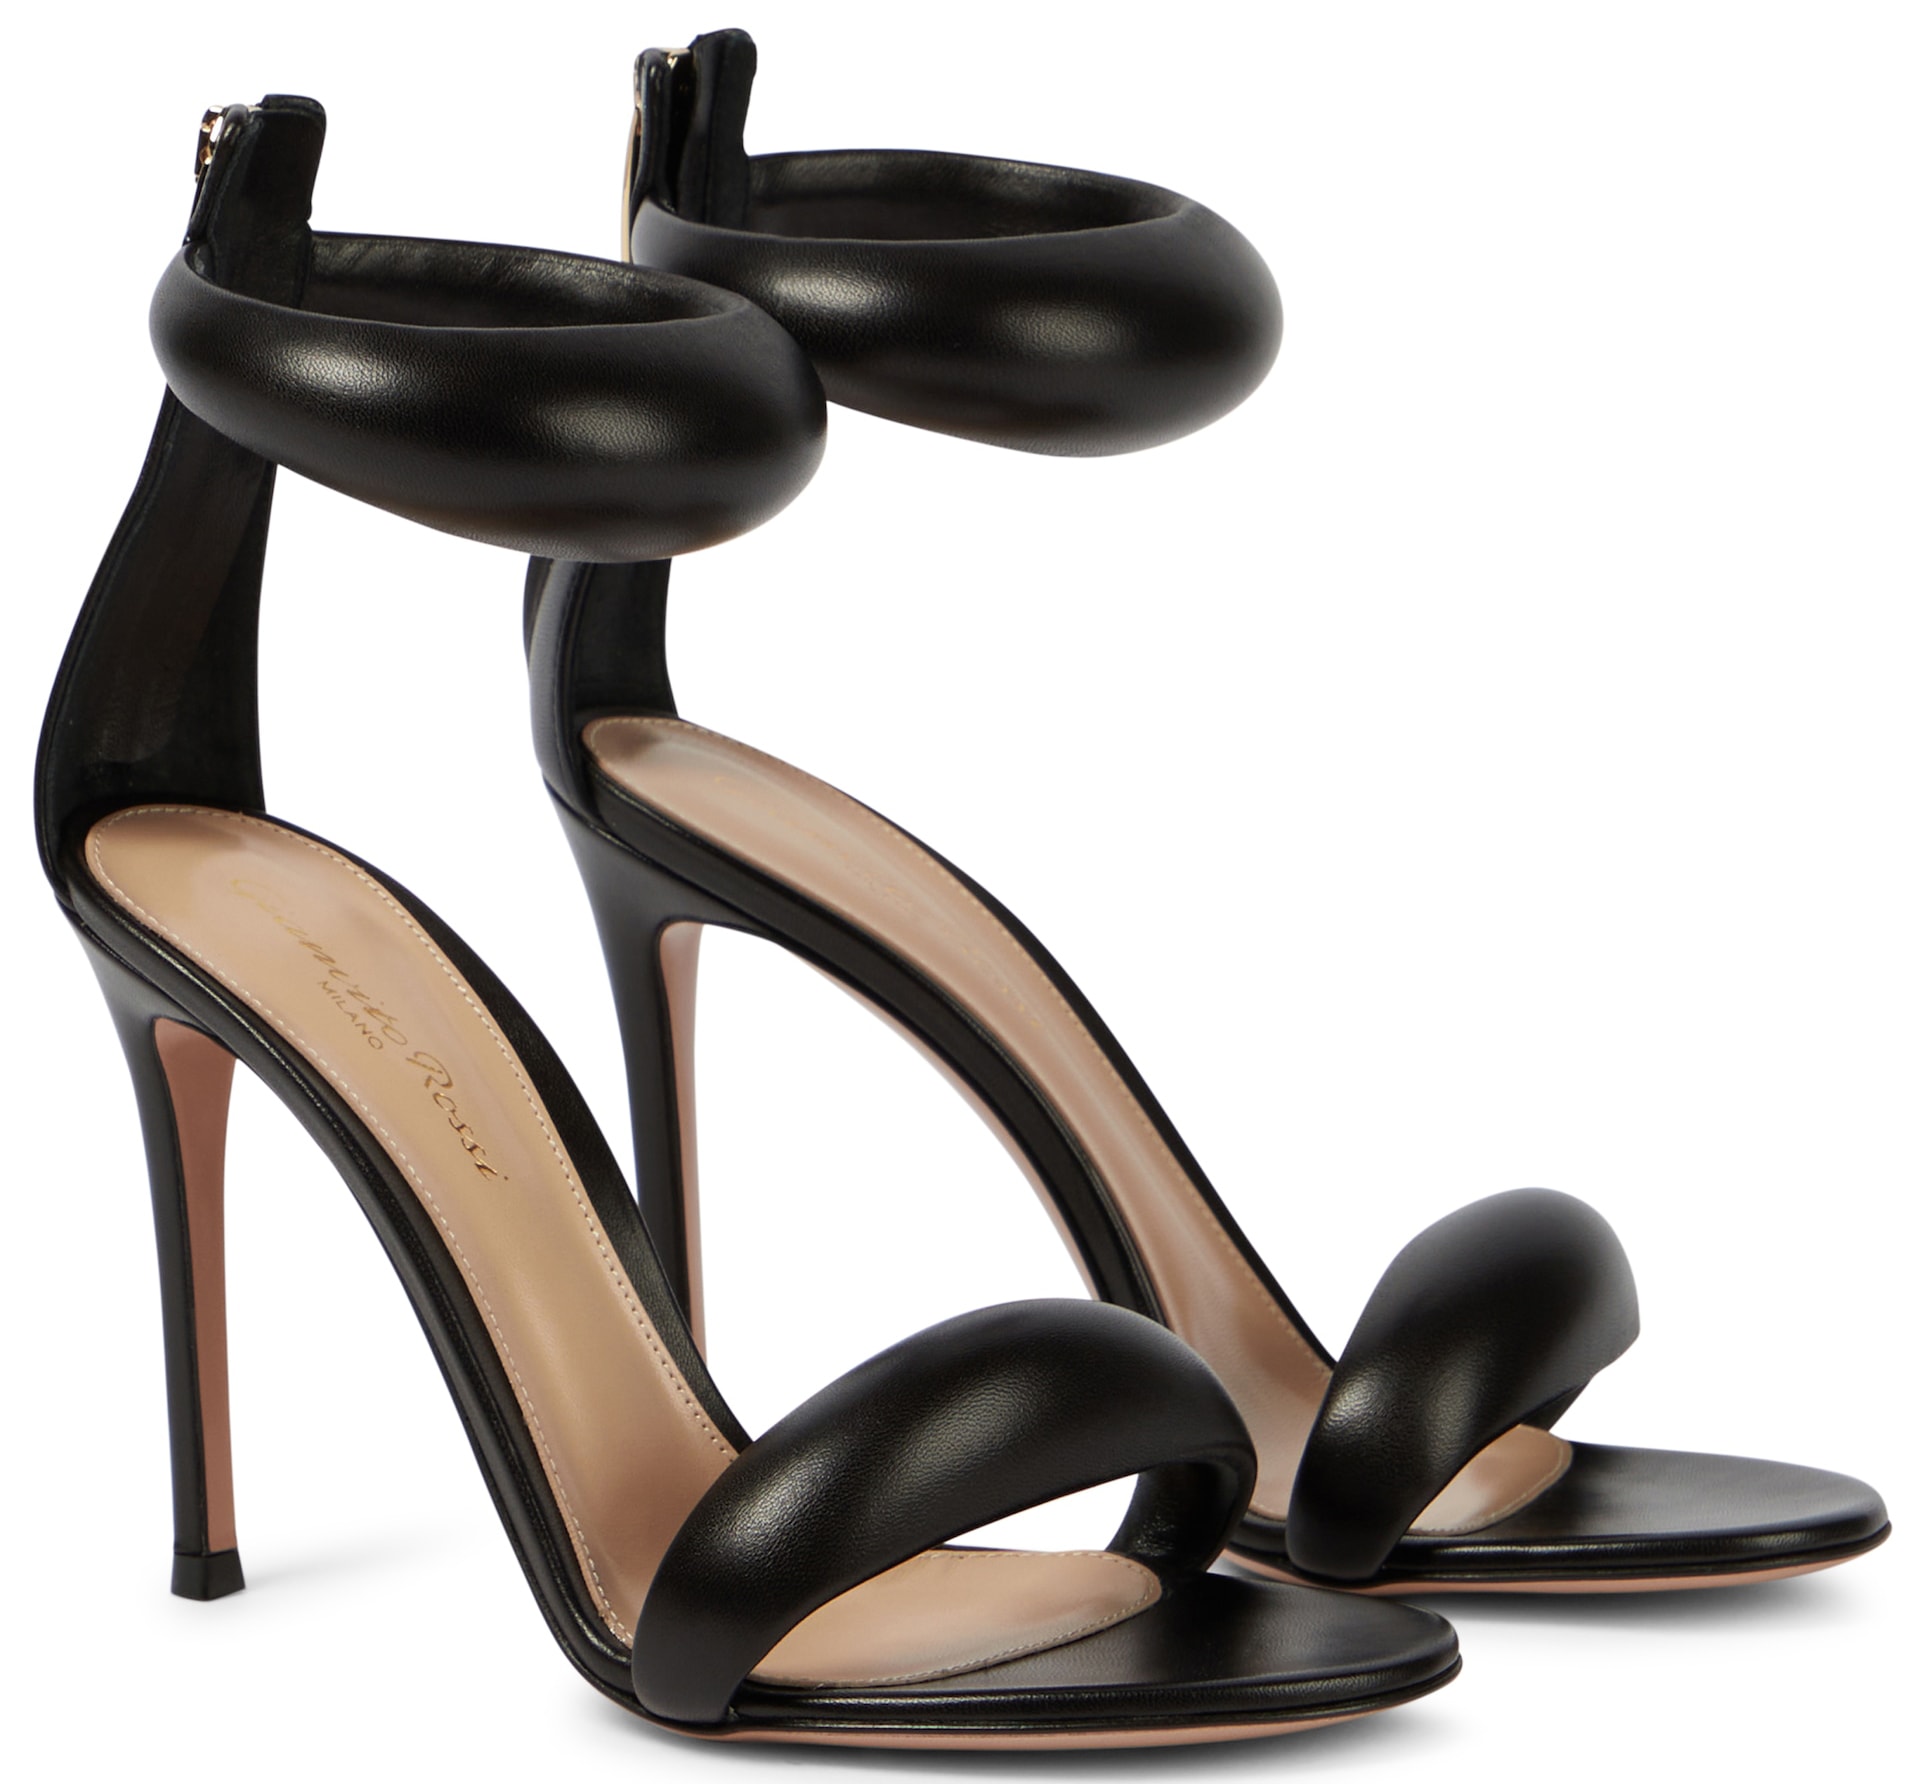 These trendy sandals feature buttery soft padded leather, a back zip, and a high stiletto heel